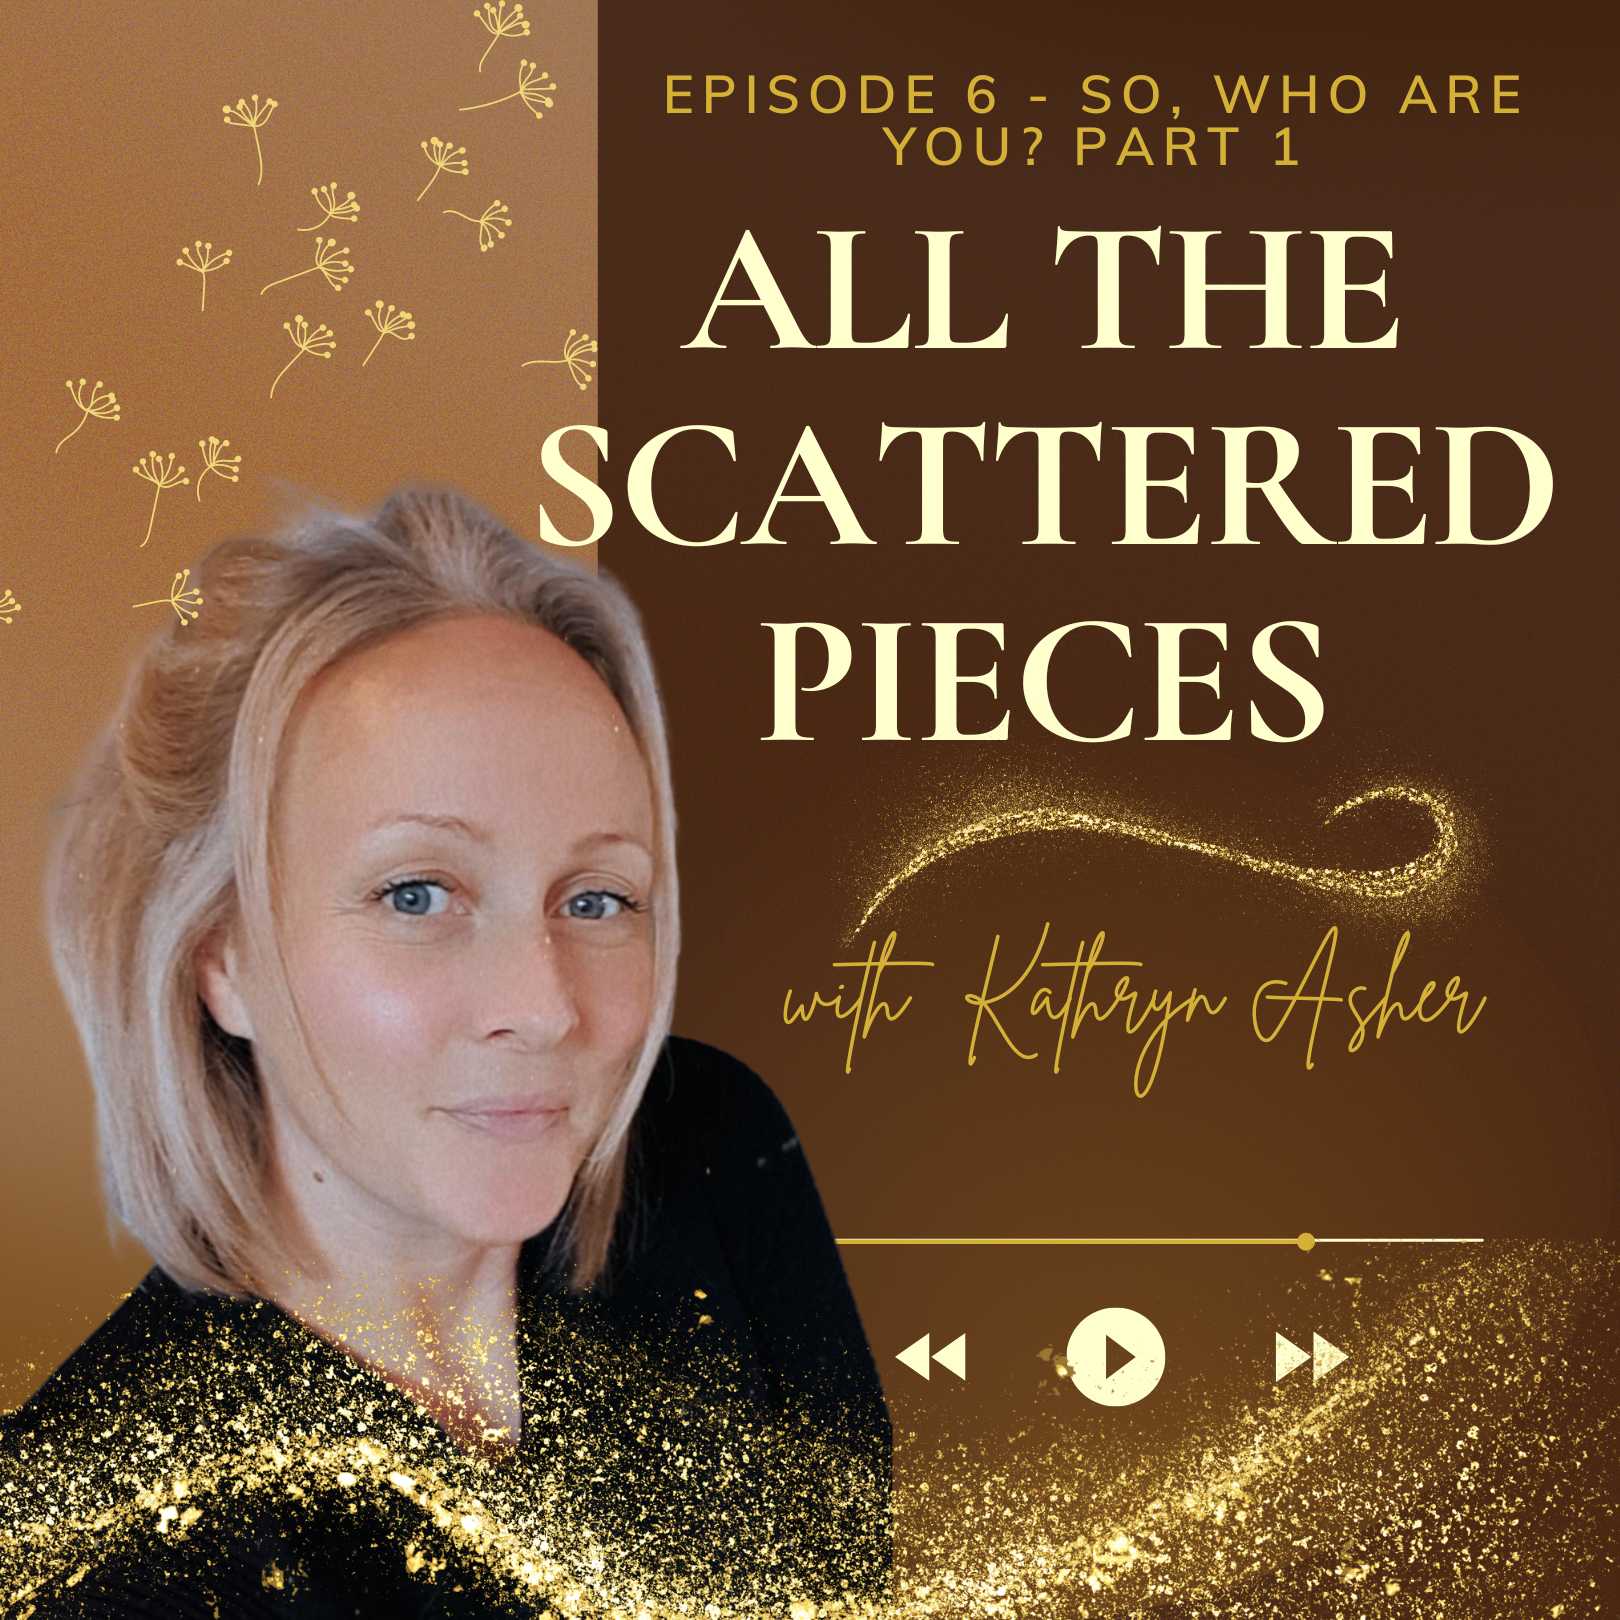 Artwork for podcast All the scattered pieces